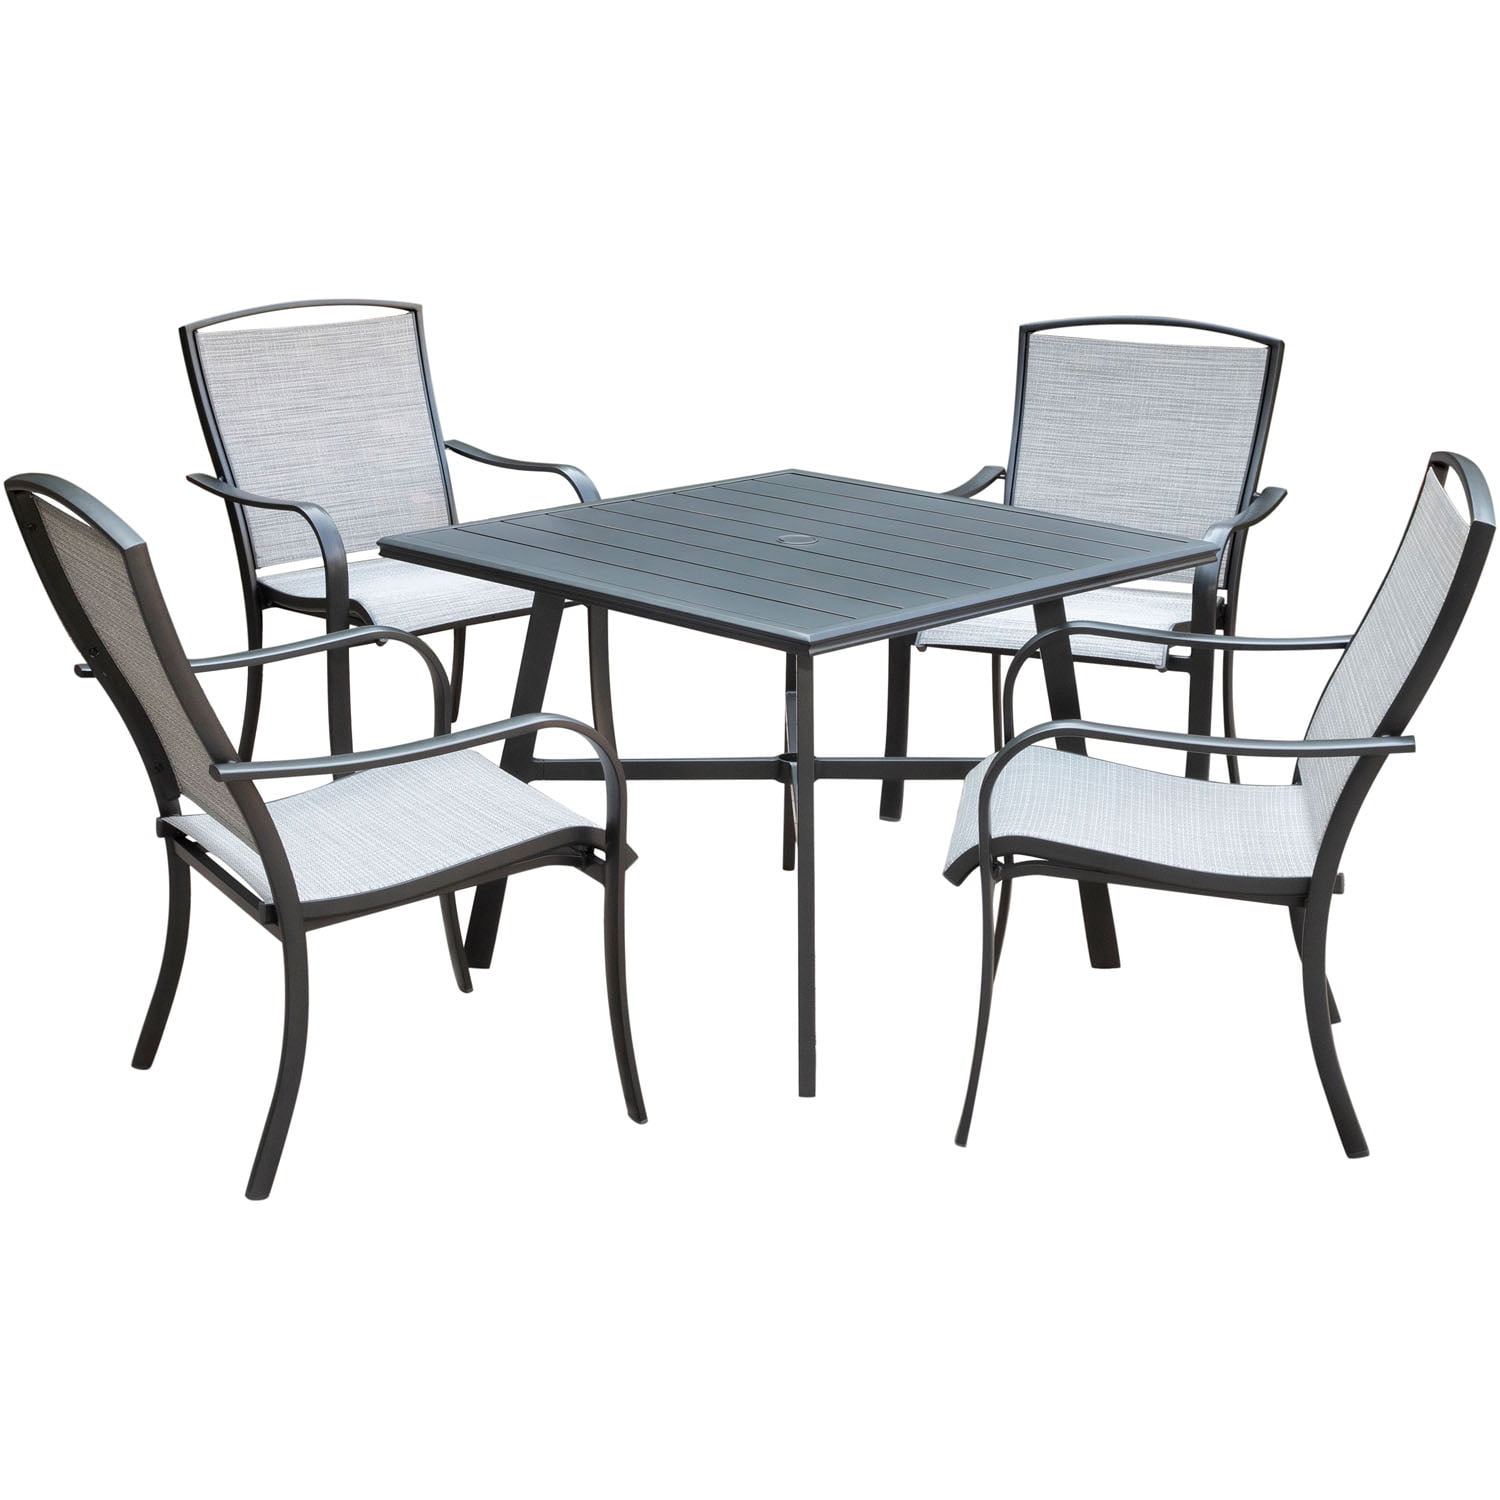 Hanover Foxhill 5-Piece Commercial-Grade Patio Dining Set with 4 Sling ...